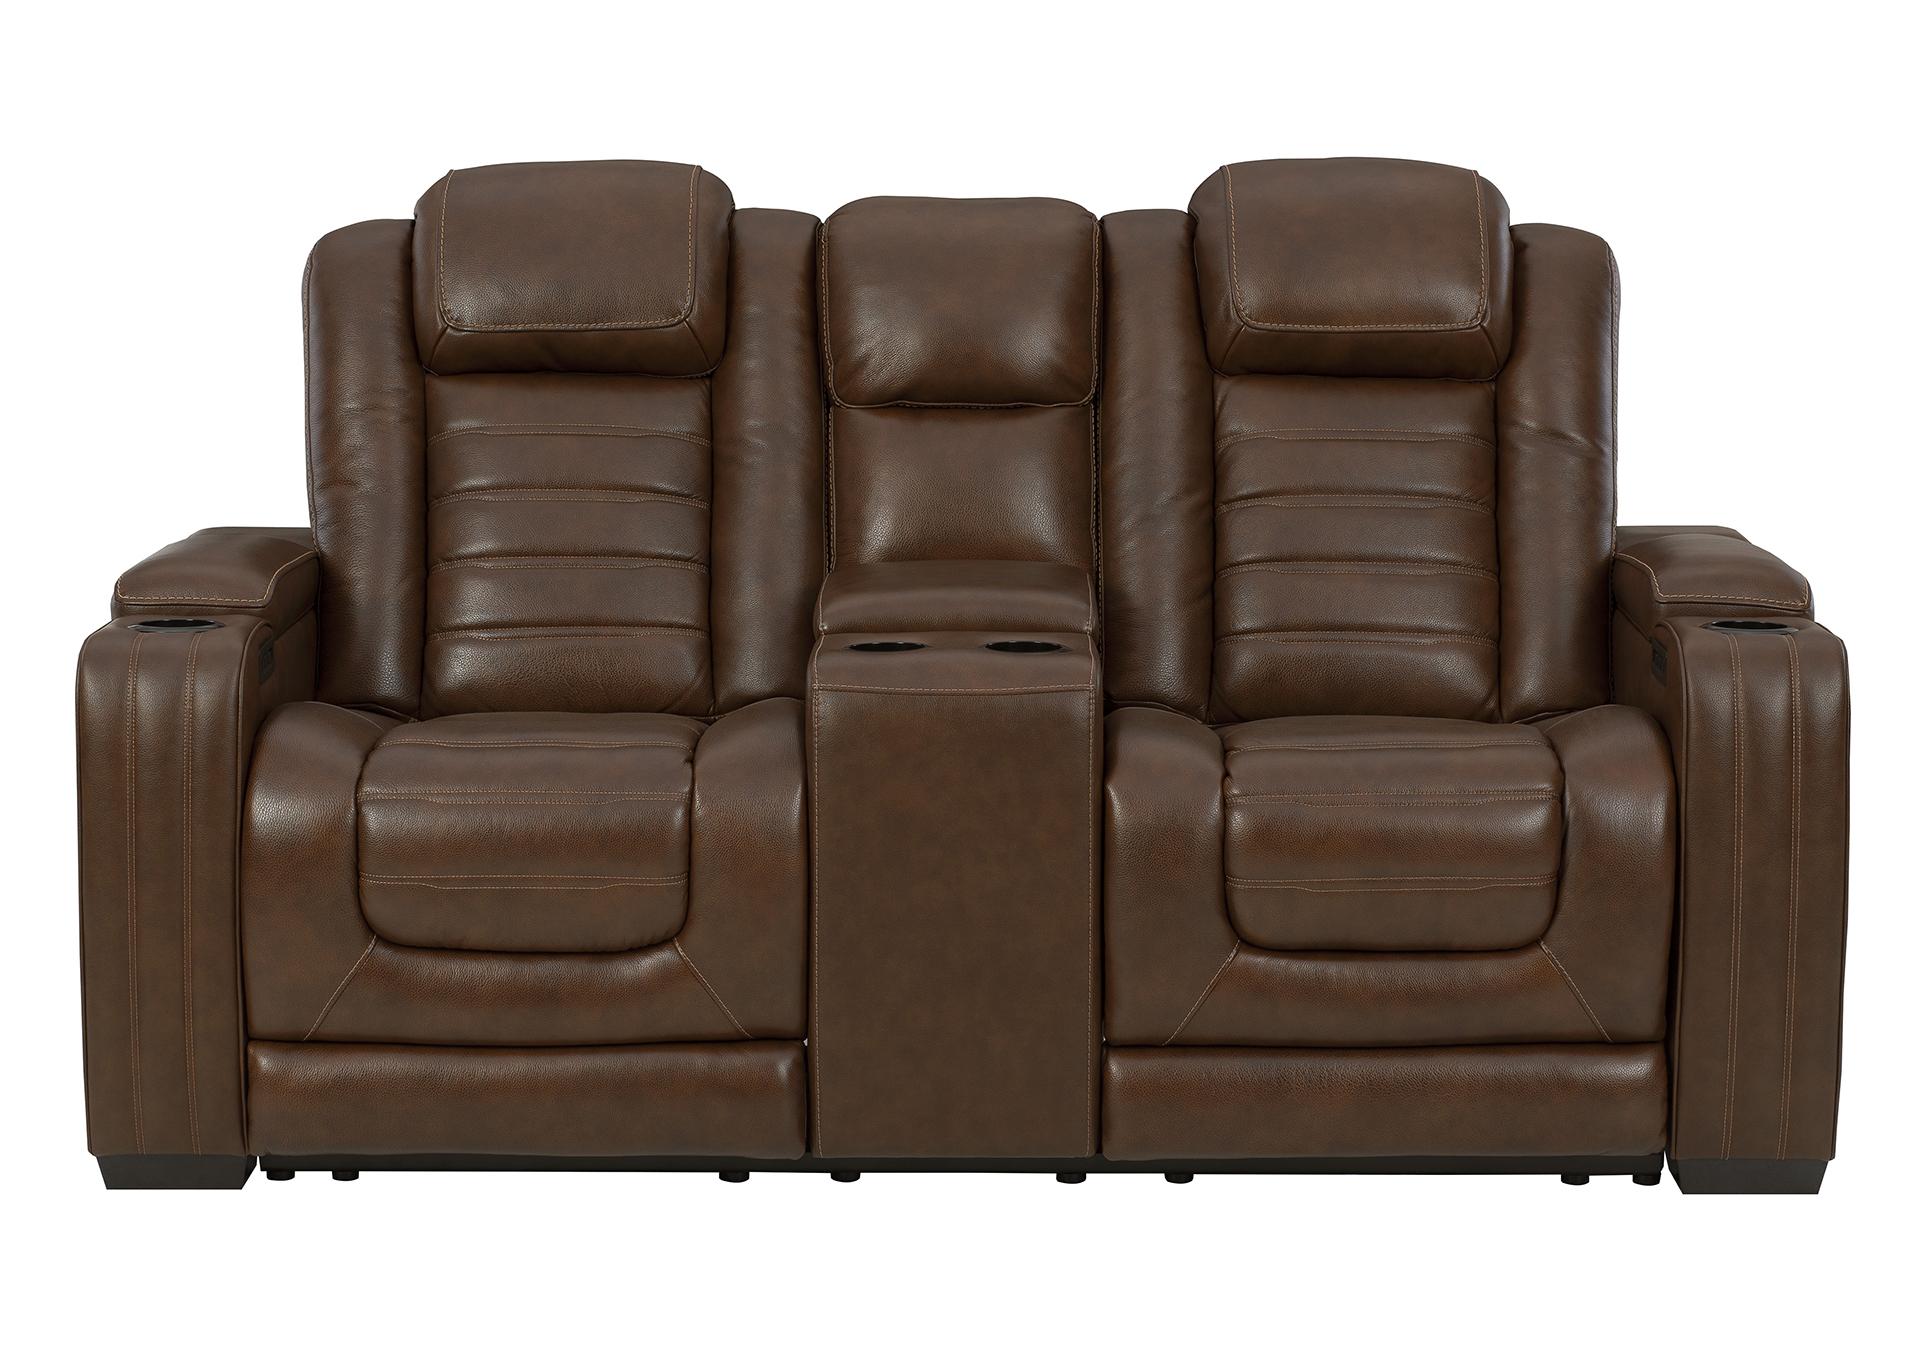 BACKTRACK CHOCOLATE LEATHER POWER RECLINING CONSOLE LOVESEAT,ASHLEY FURNITURE INC.